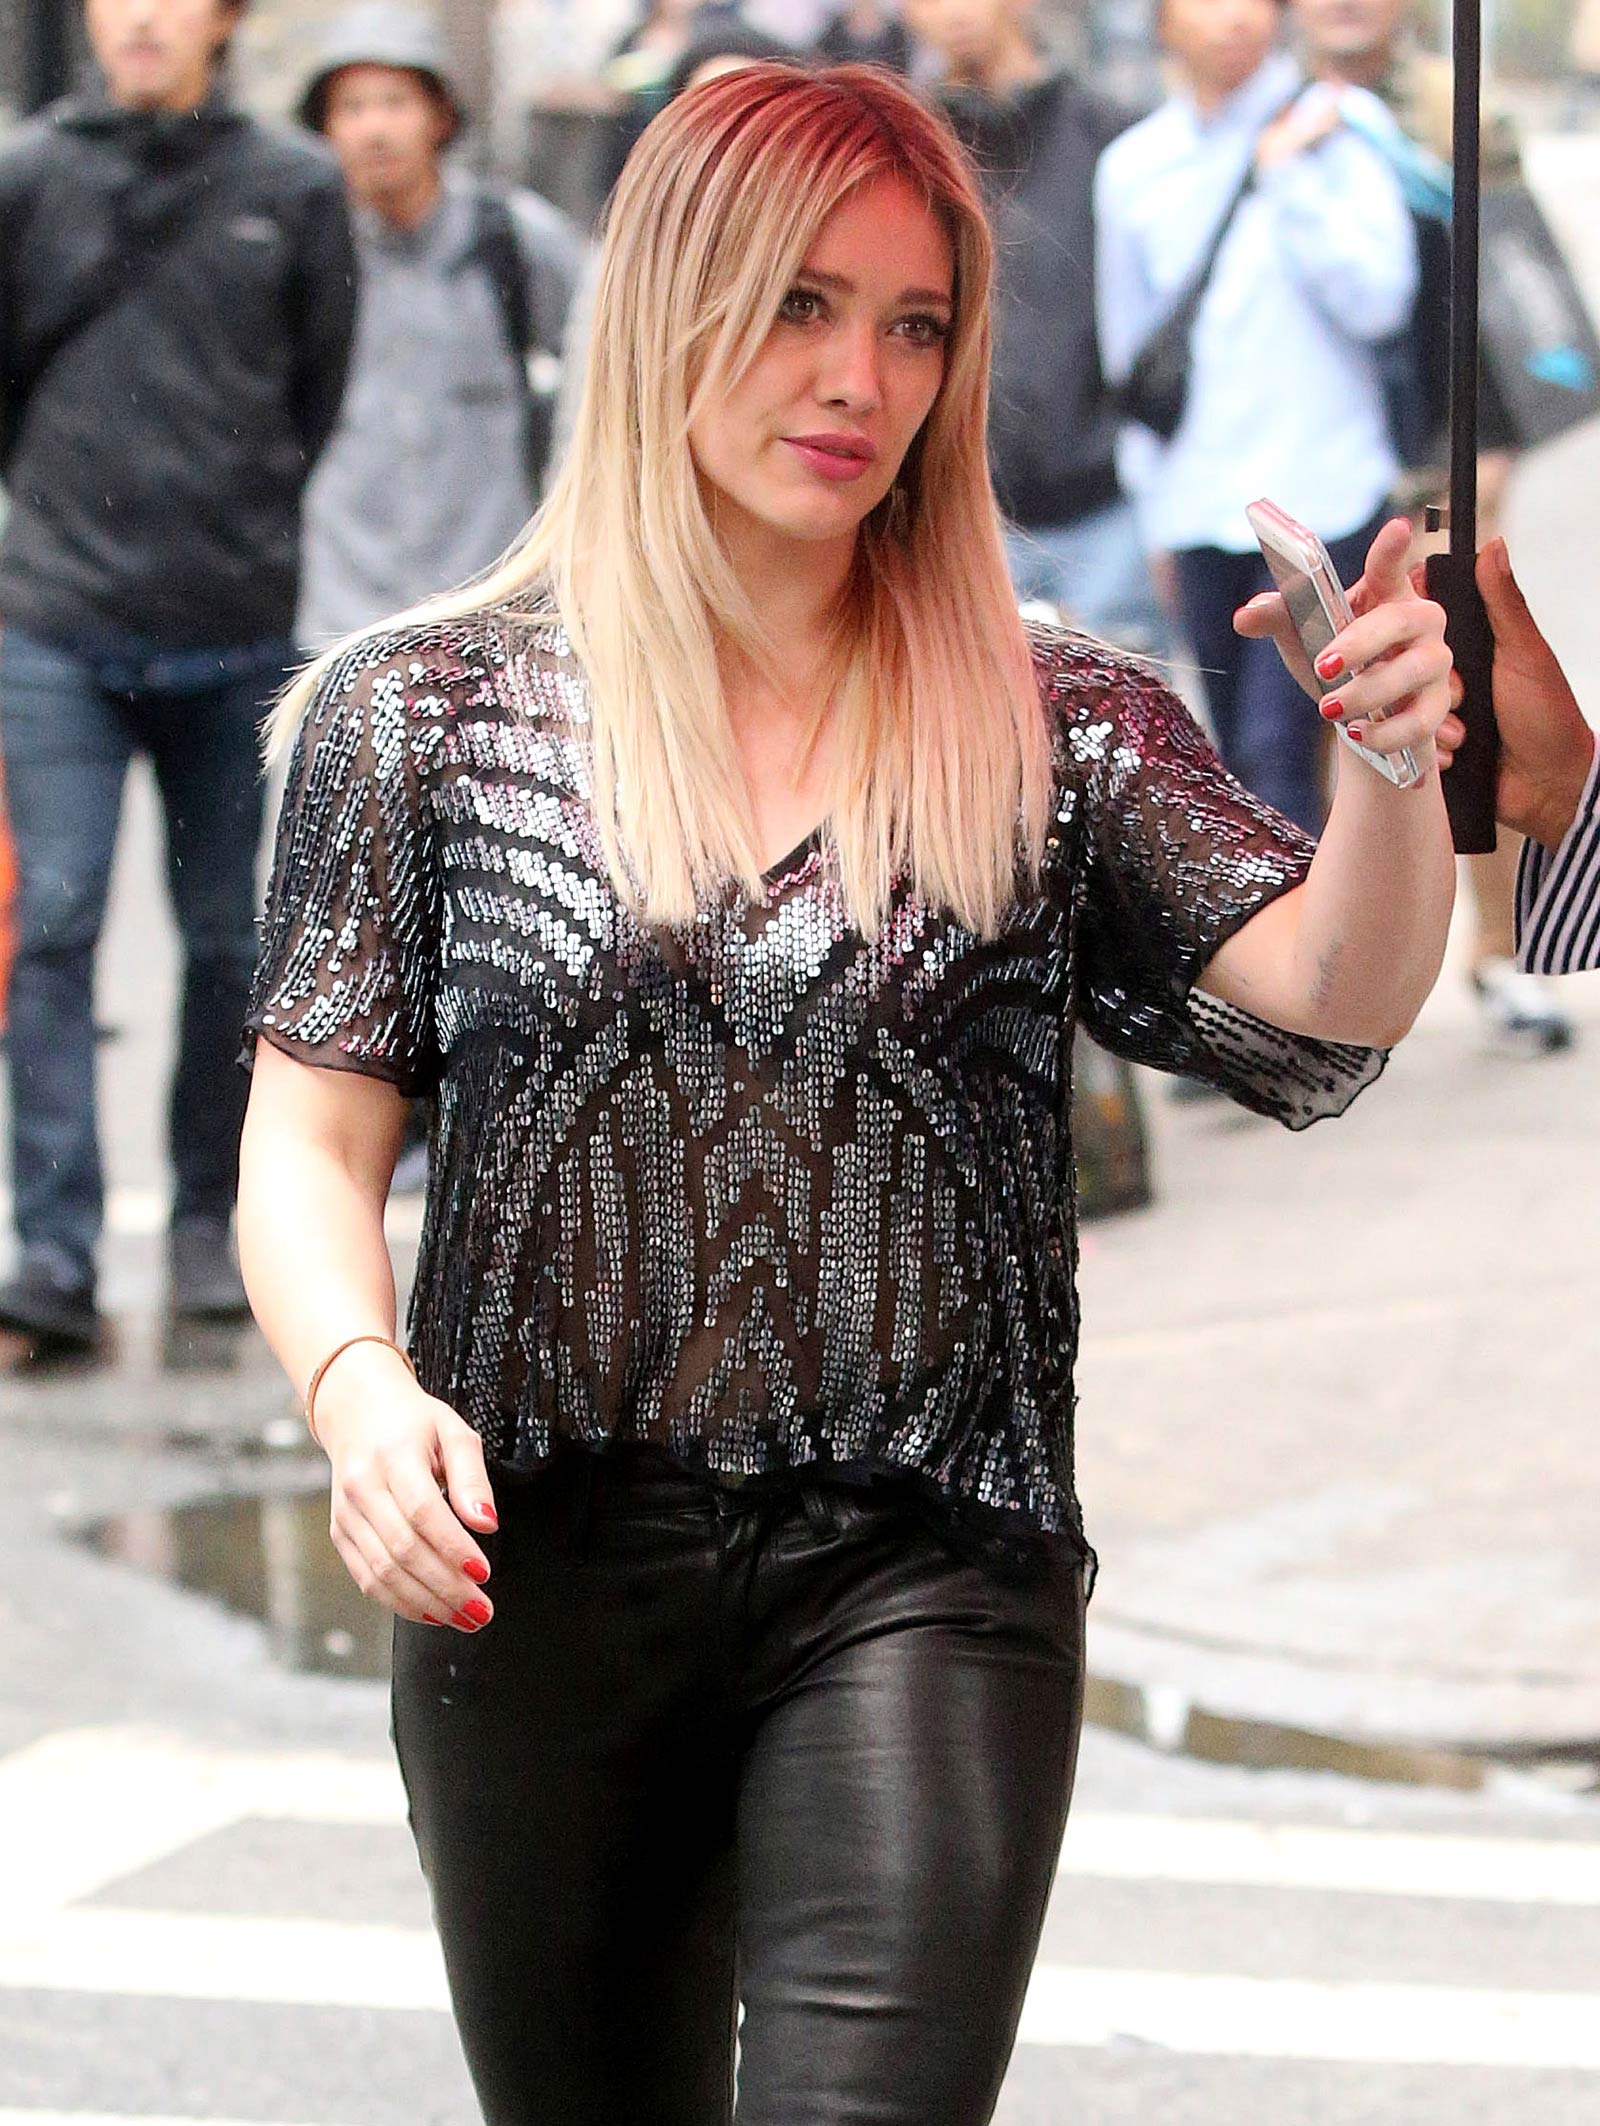 Hilary Duff on the set of Younger